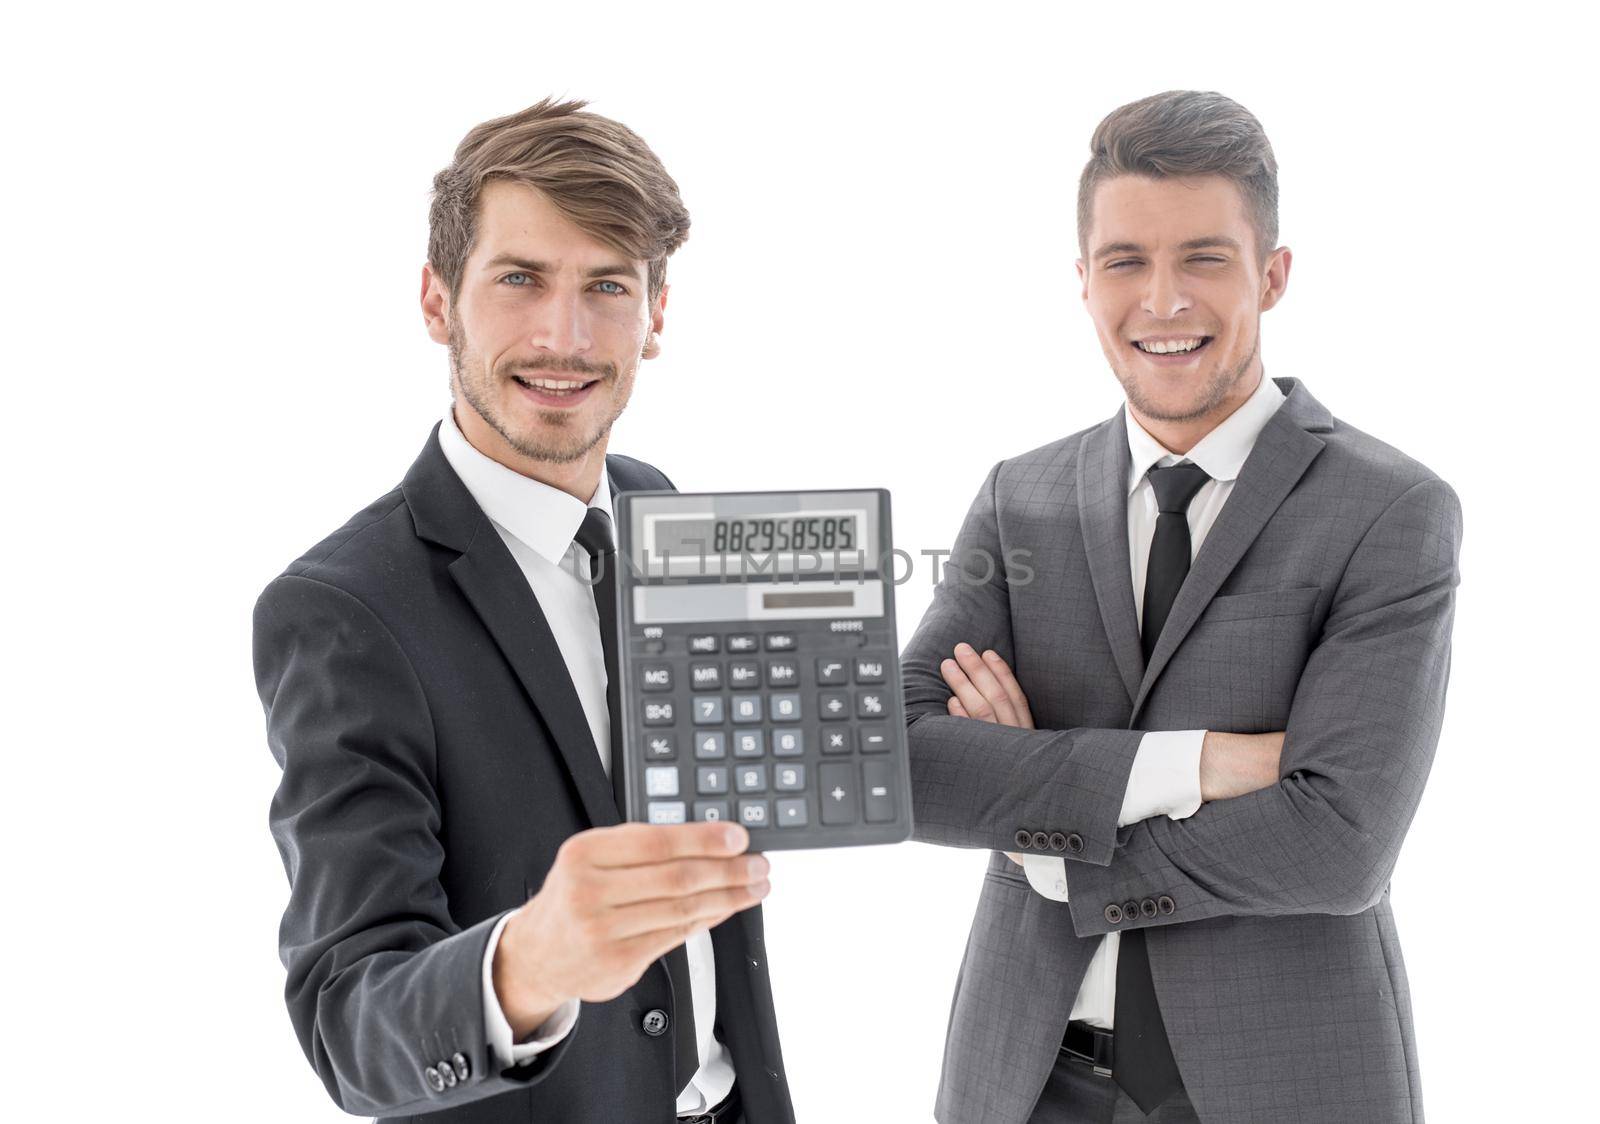 two young people holding a calculator and smiling. white background behind